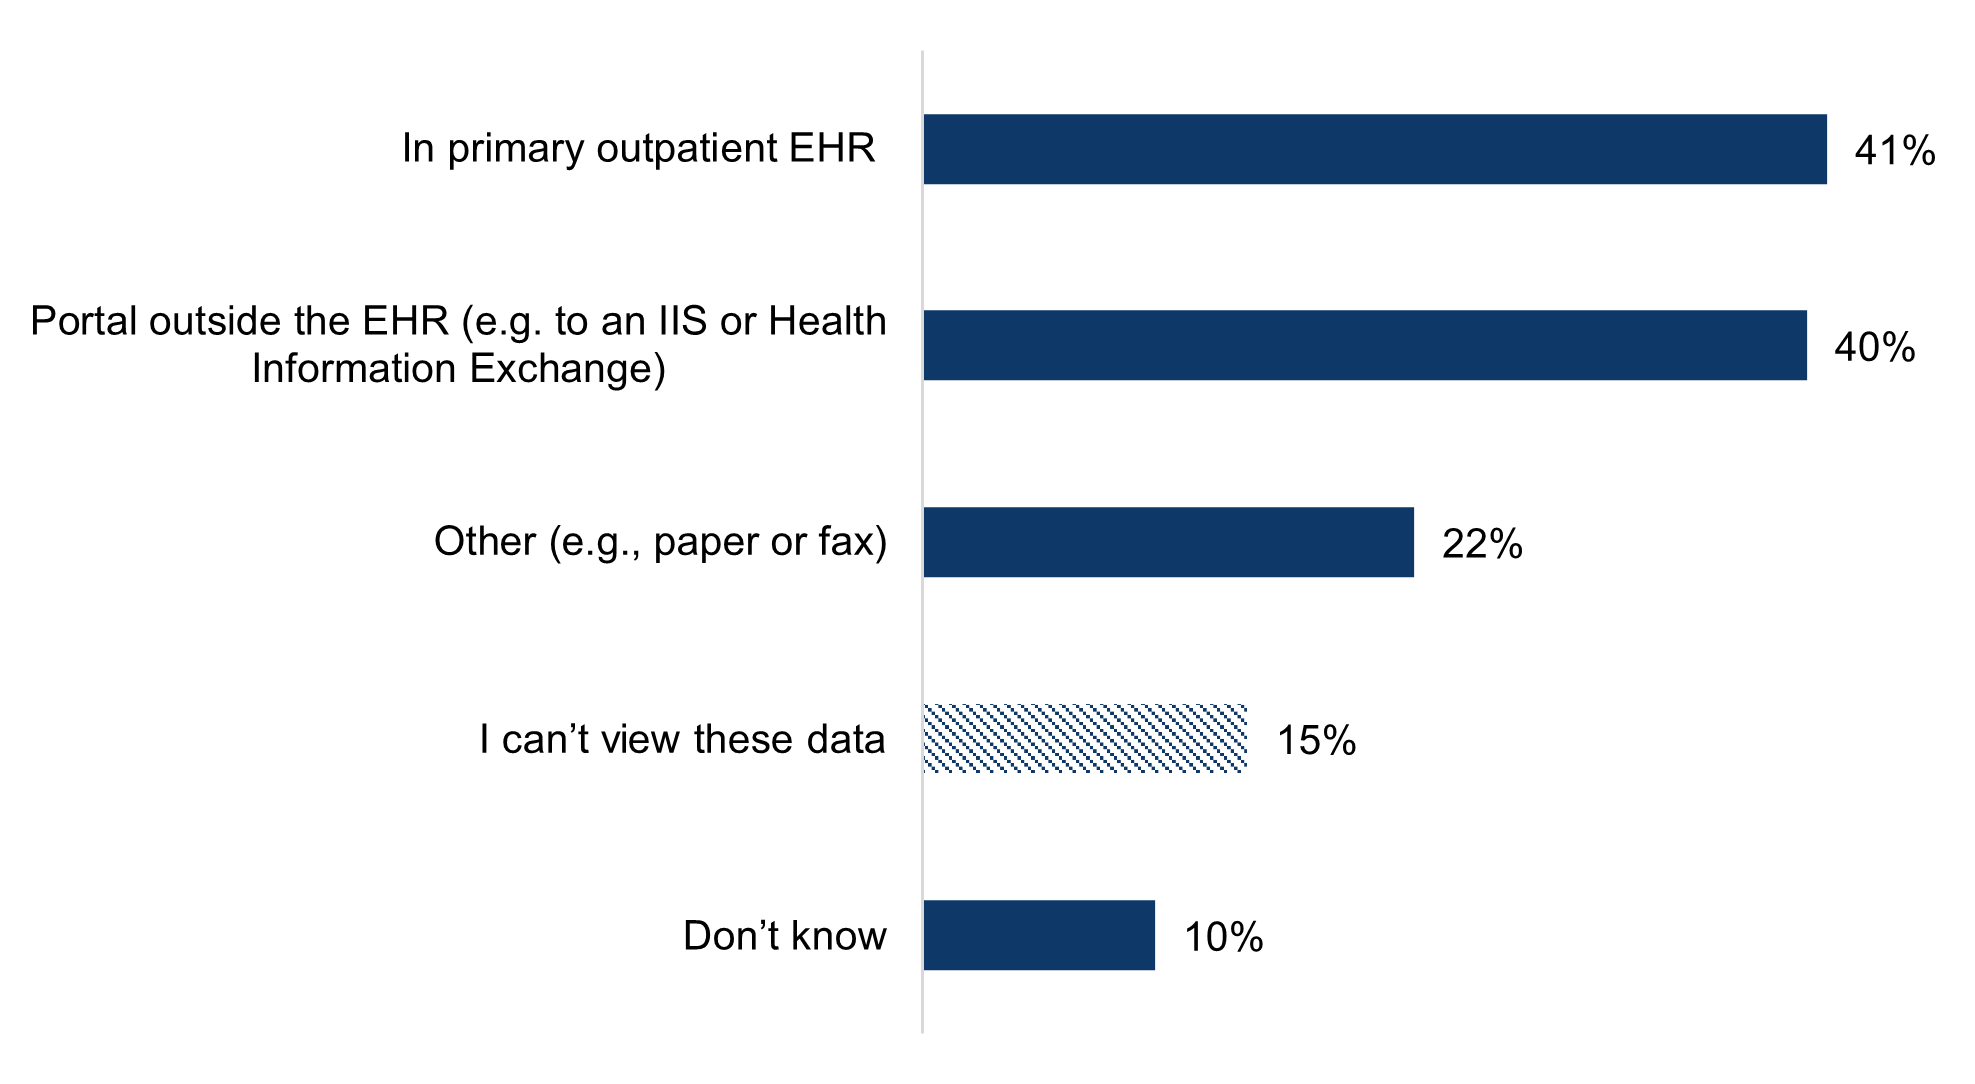 This figure contains a horizontal bar chart that displays the percentage of physicians that report using various methods to view immunization data from outside their organization. The x-axis represents a range of percentages from 0% to 100%, and the y-axis shows the following categories of methods physicians may use to view immunization data form outside organizations: “In primary outpatient EHR”, “Portal outside the EHR (e.g. to an IIS or Health Information Exchange)”, “Other (e.g., paper or fax)”, “I can’t view these data”, and “Don’t know.” The chart shows that 41% of physicians indicated using their primary outpatient EHR to view immunization data from outside their organization, 40% used a portal outside the EHR, 22% used another method, 15% indicated that they could not view these data, and 10% did not know. 